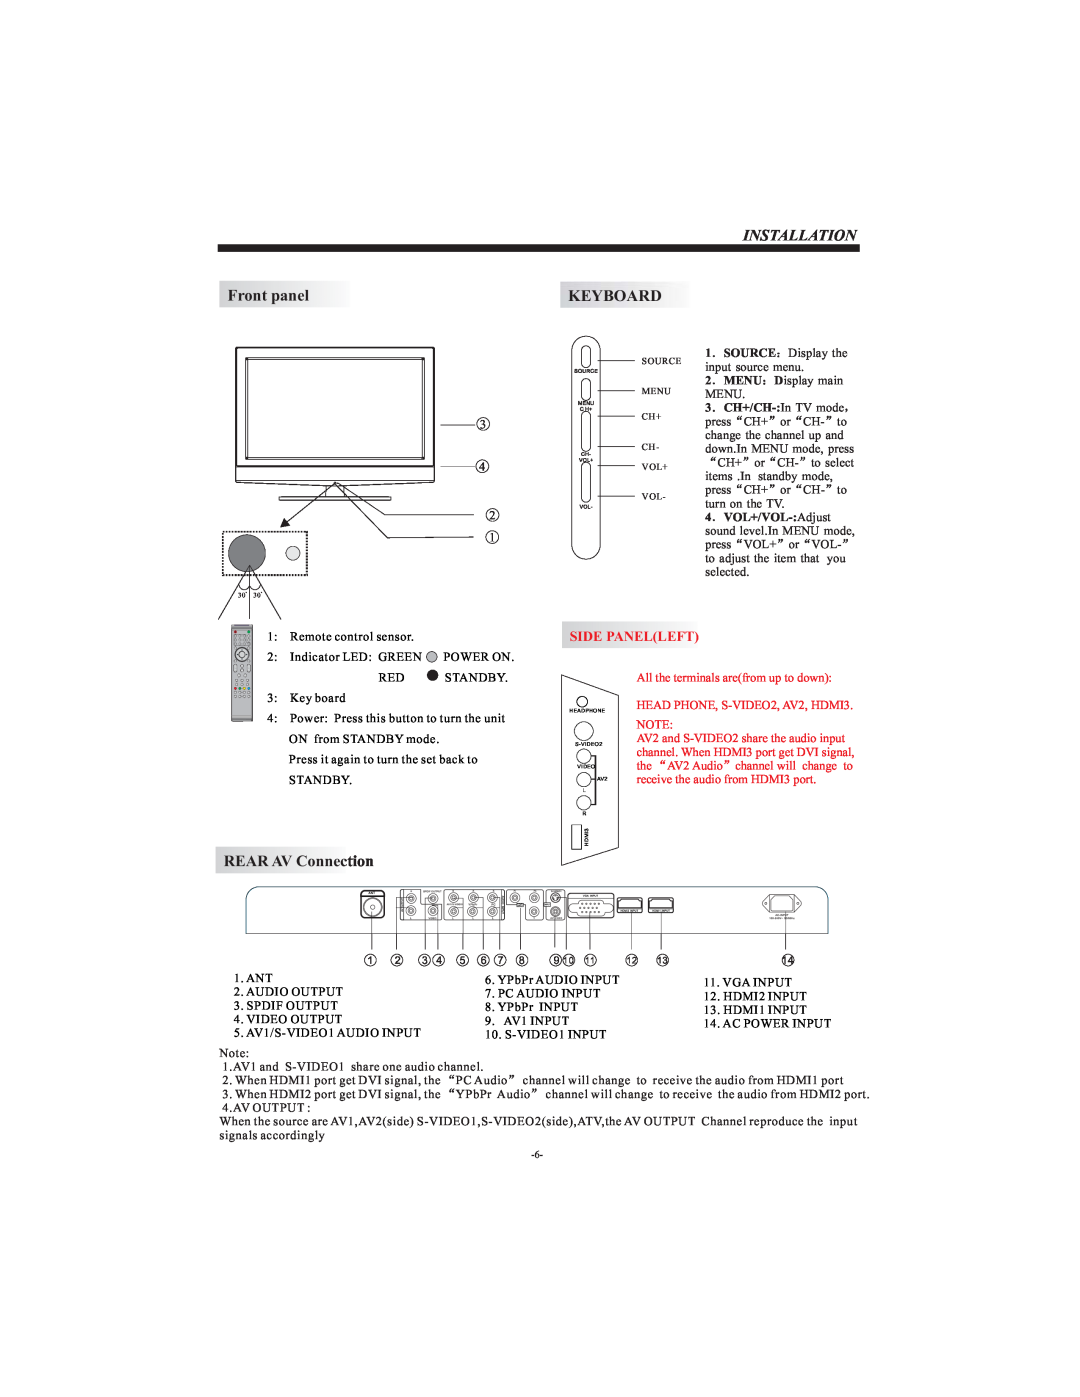 Curtis LCDVD3202A user manual Installation, Front panel, Keyboard, REAR AV Connection, Side Panelleft, 3 CH+/CH- In TV mode 